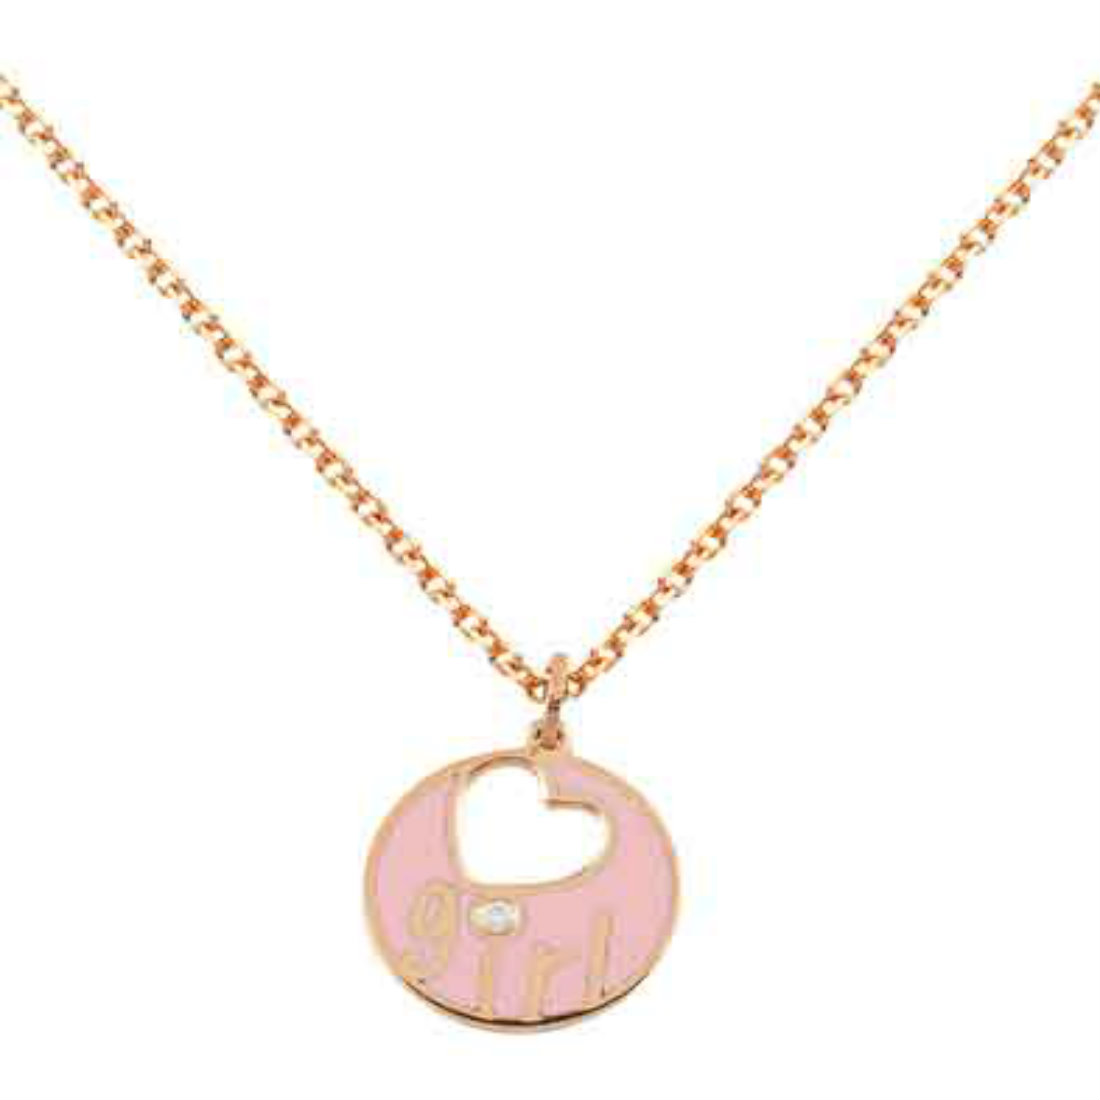 ROSE GOLD 14K NECKLACE HEART WITH DIAMONDS